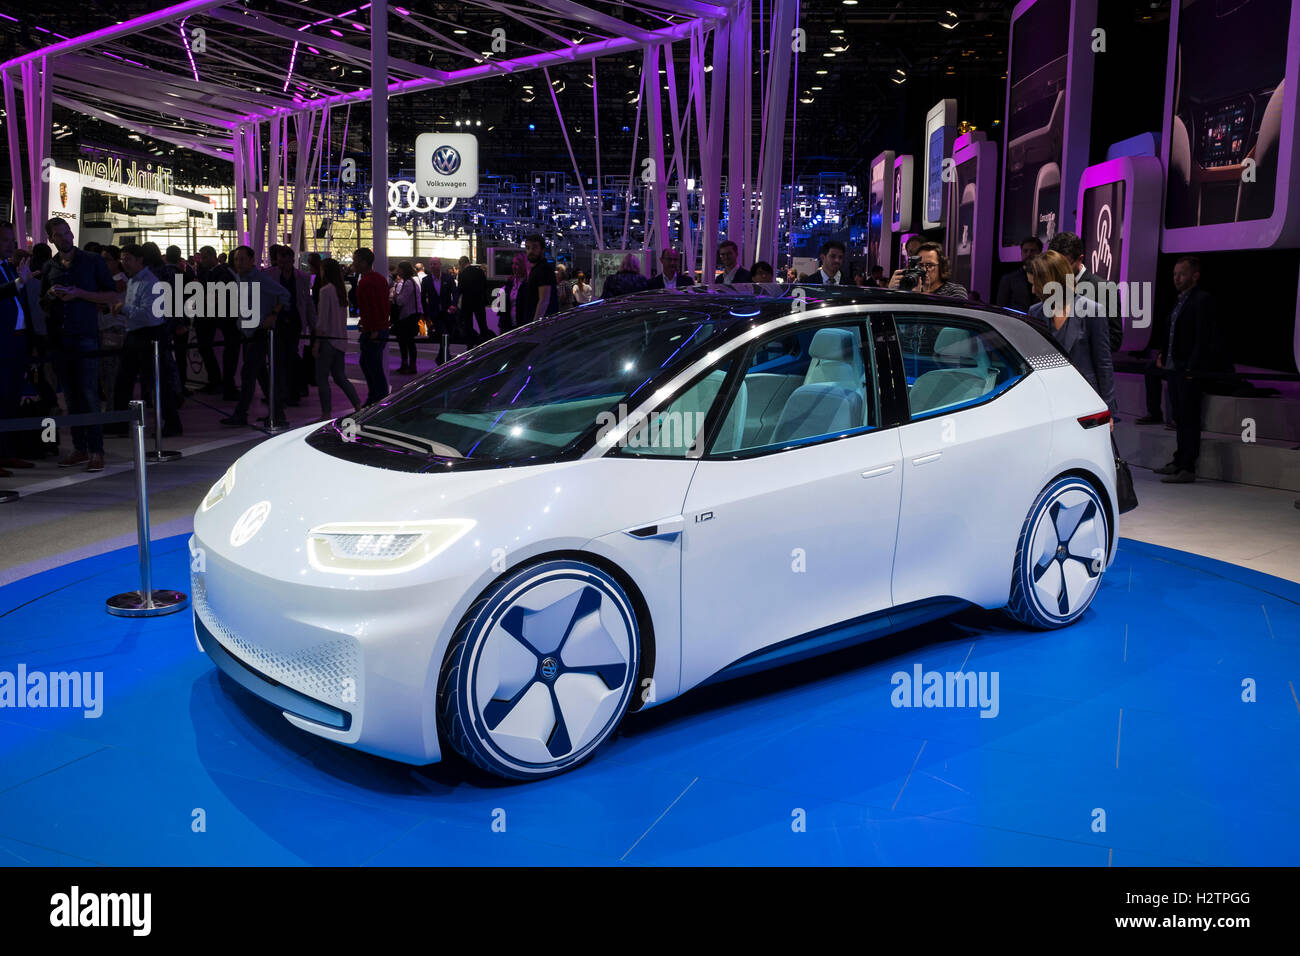 New Volkswagen ID electric plug-in concept vehicle at Paris Motor Show 2016 Stock Photo